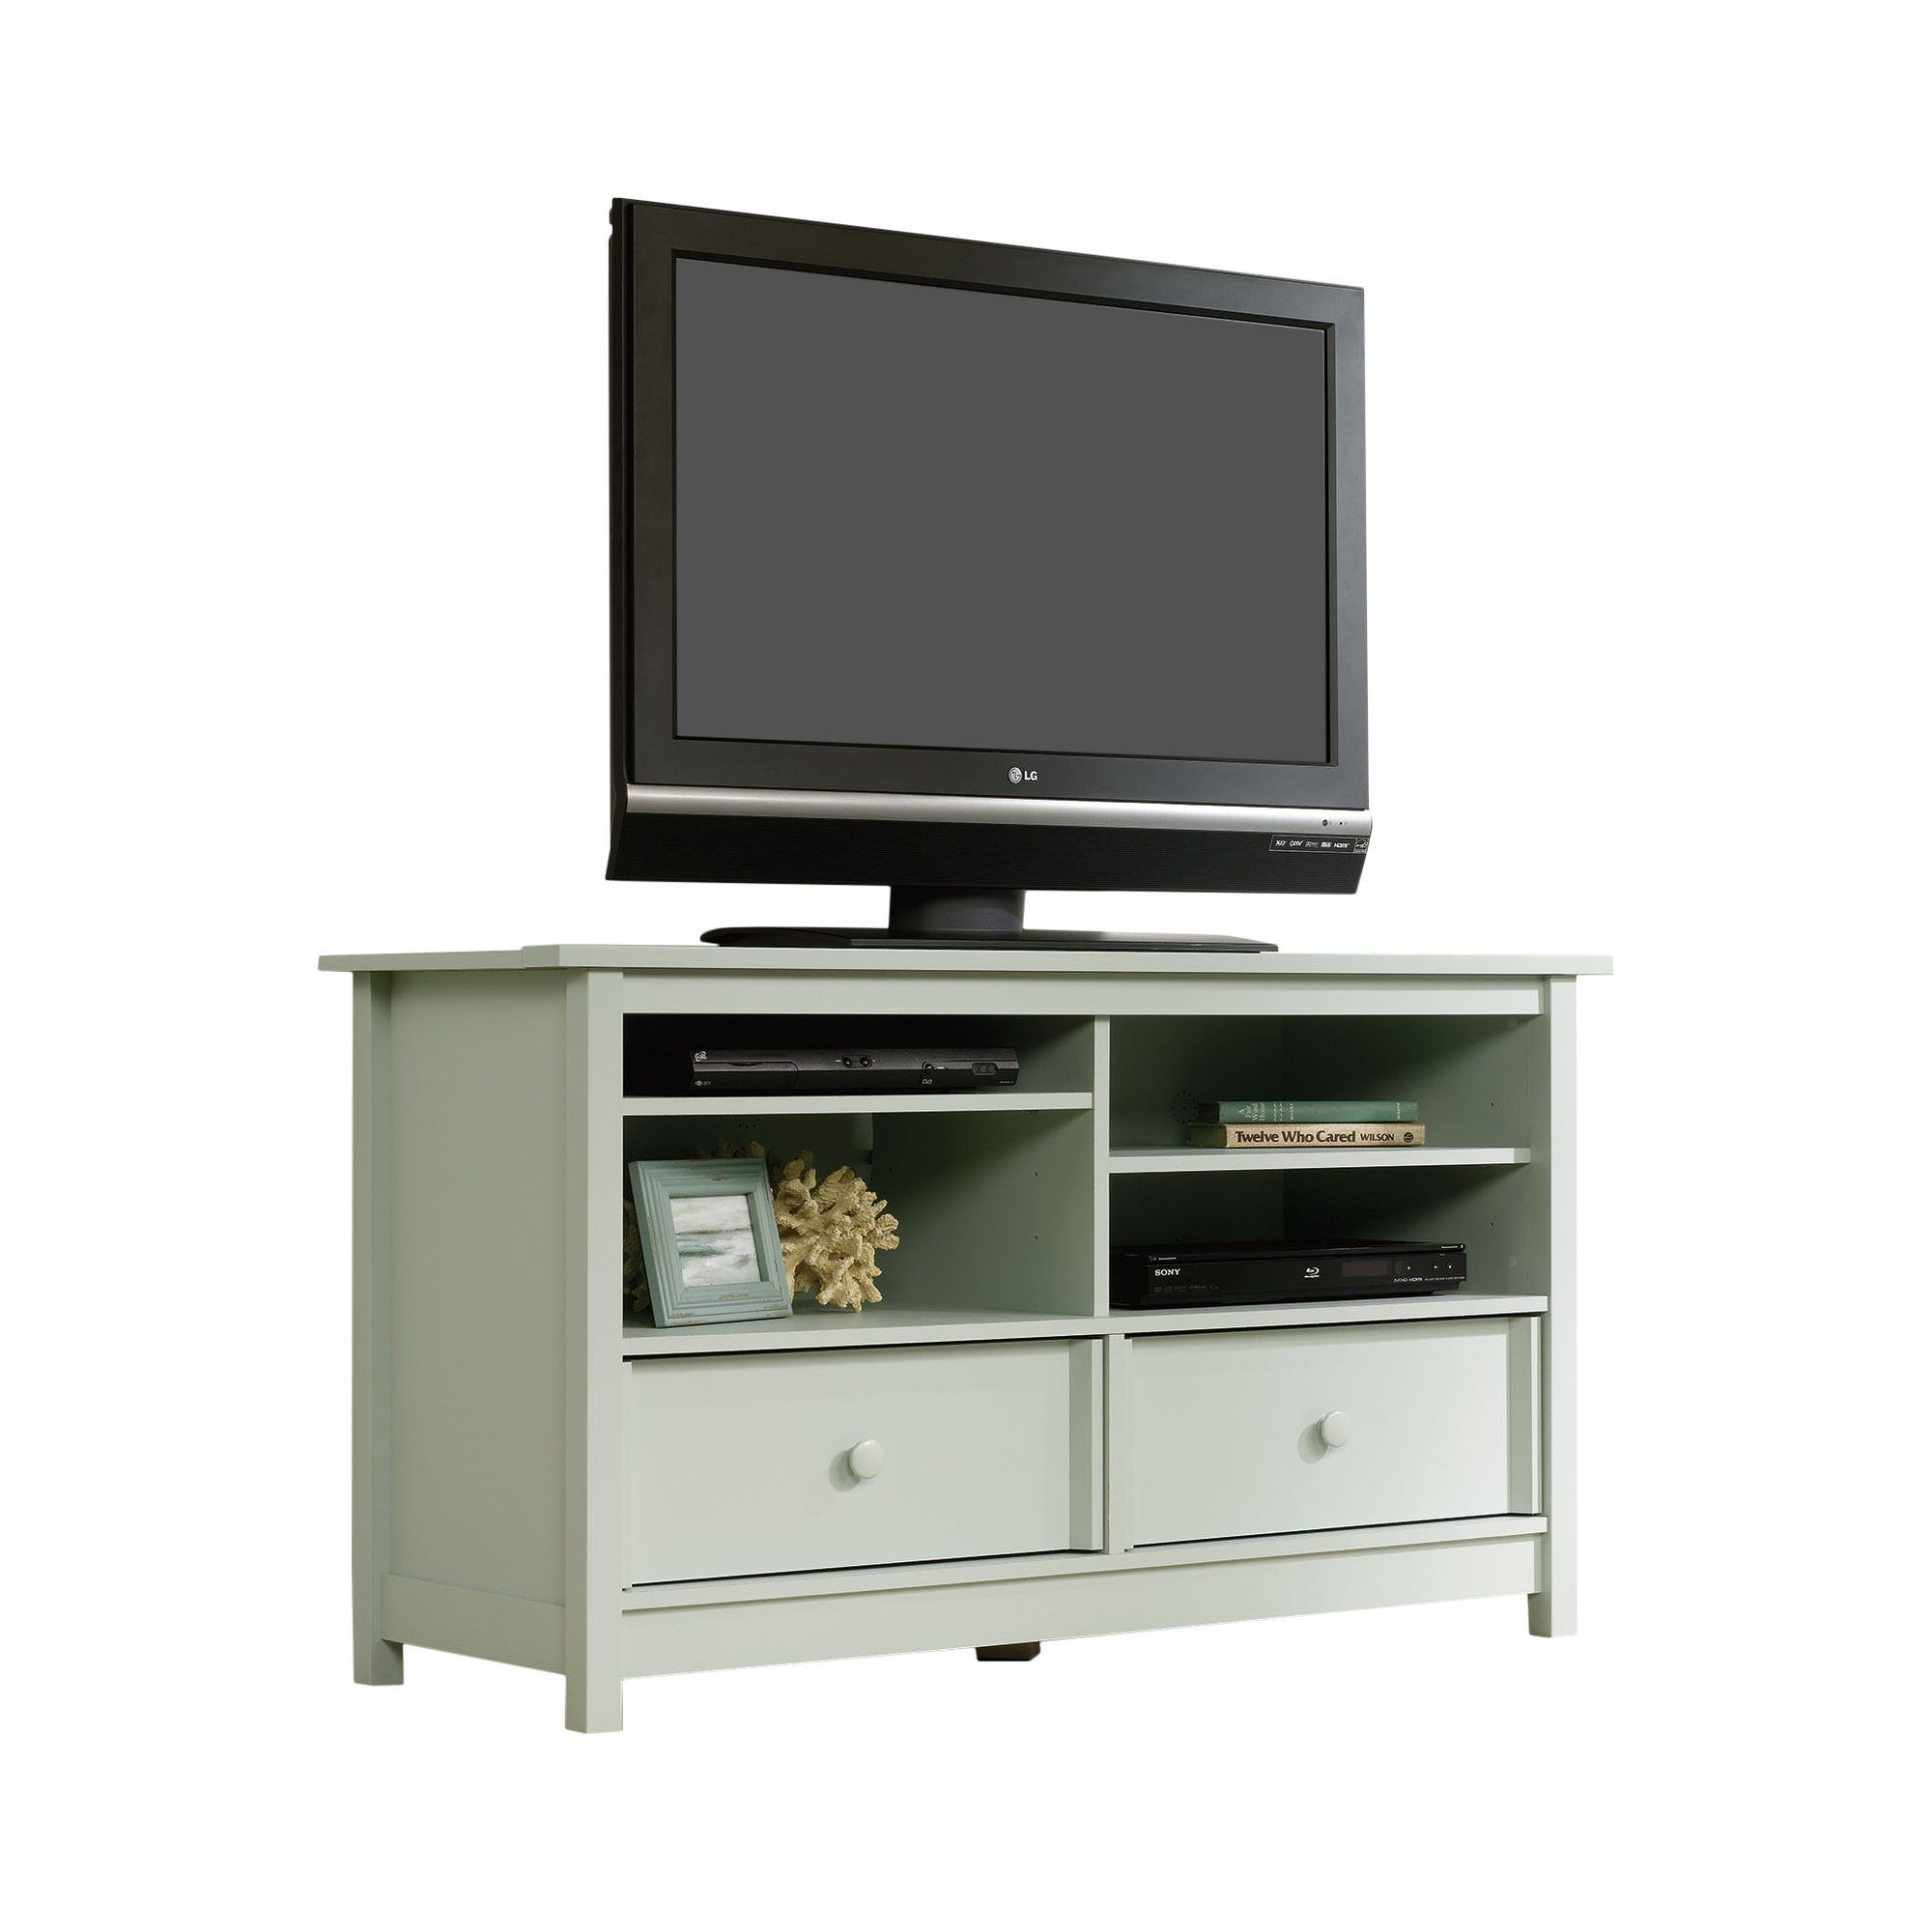 Customer Image Zoomed | Cool Tv Stands, Entertainment Inside Funky Tv Stands (View 5 of 15)